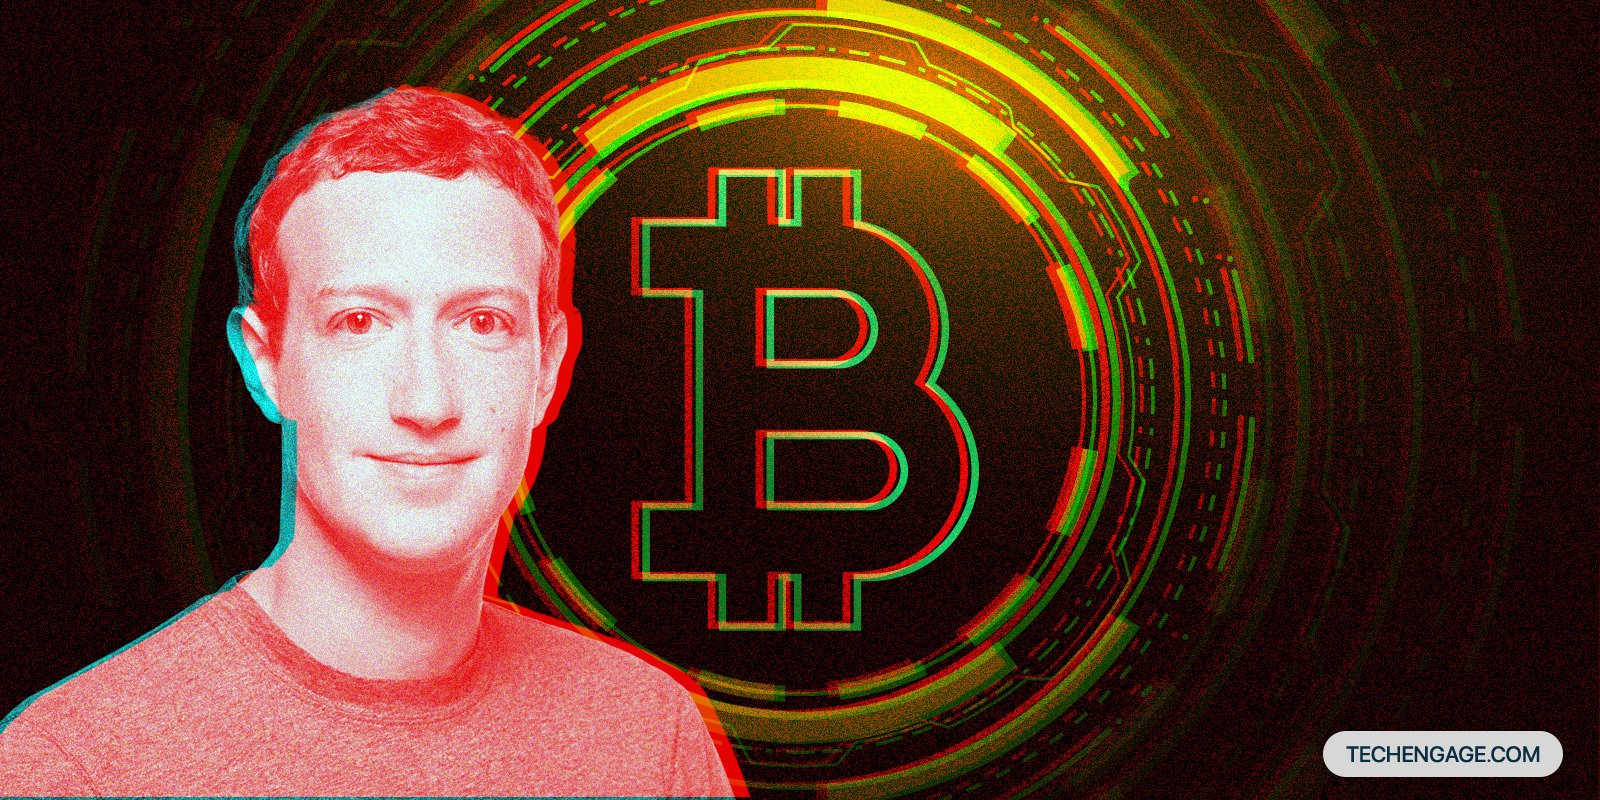 Mark Zuckerberg’s Dream Of Creating A Global Cryptocurrency Has Come To A Dreadful End